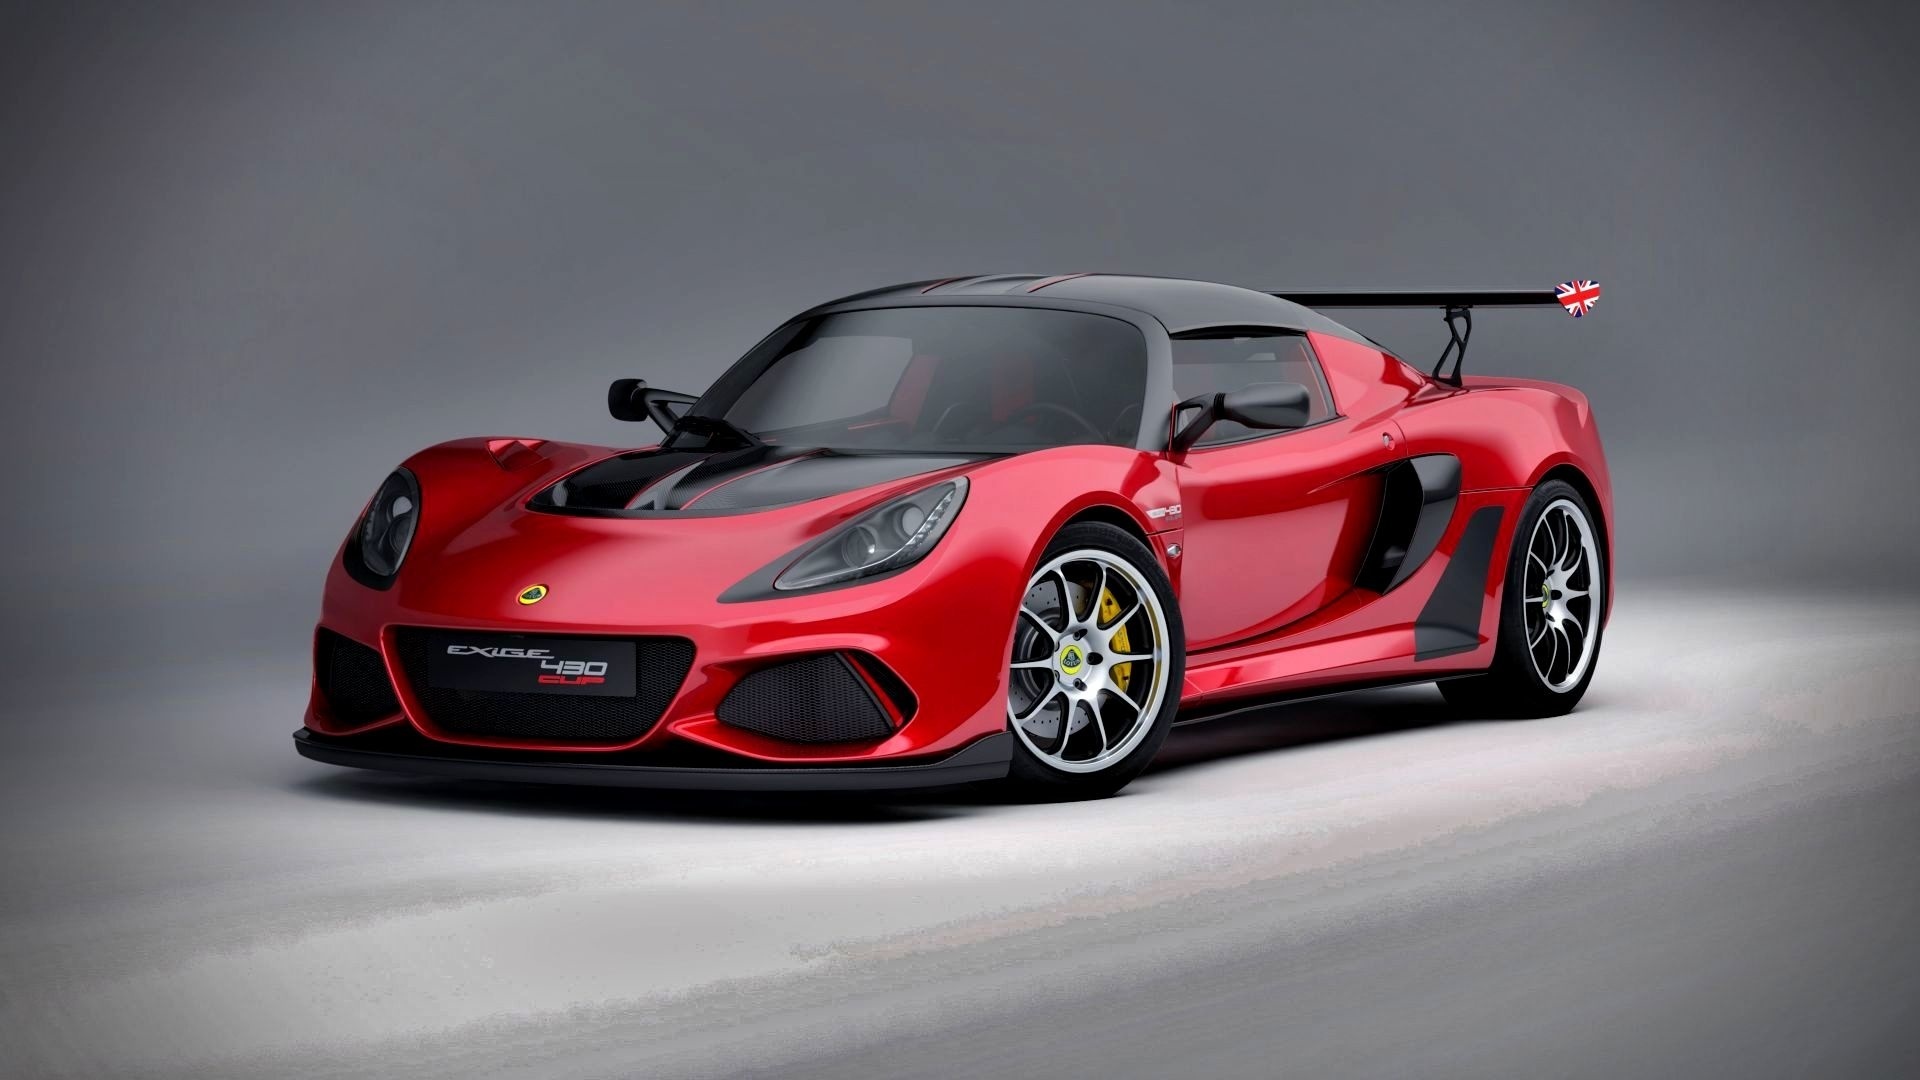 Lotus Exige, Final edition 2021, Automotive photography, Driving perfection, 1920x1080 Full HD Desktop